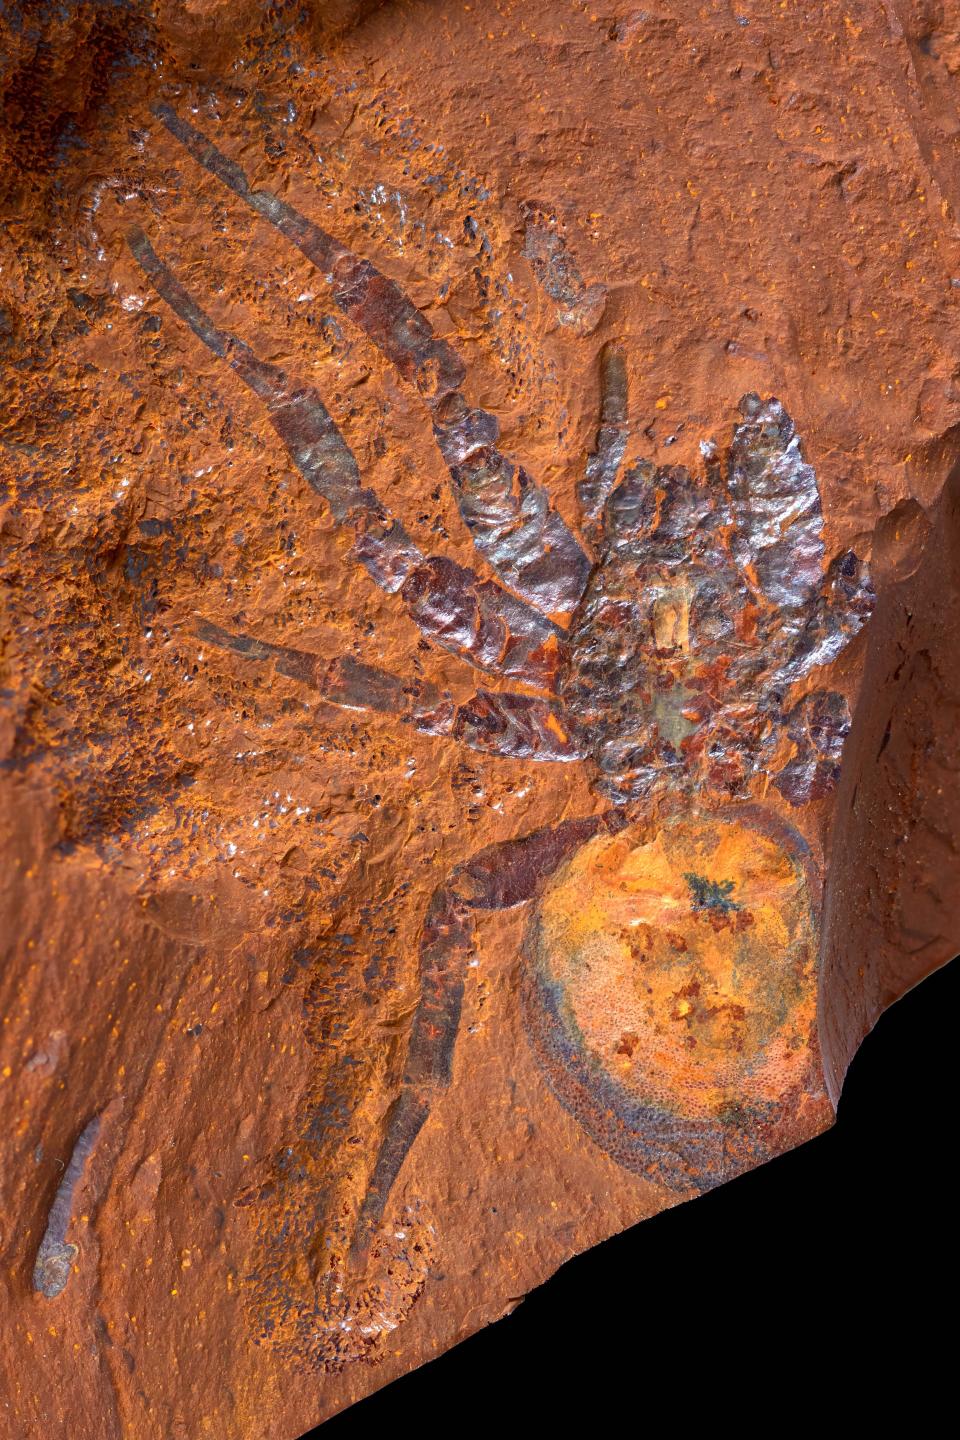 An image of the Megamonodontium mccluskyi spider fossil Australian scientists discovered on Wednesday, Sept. 20, 2023 at a research site in New South Wales.